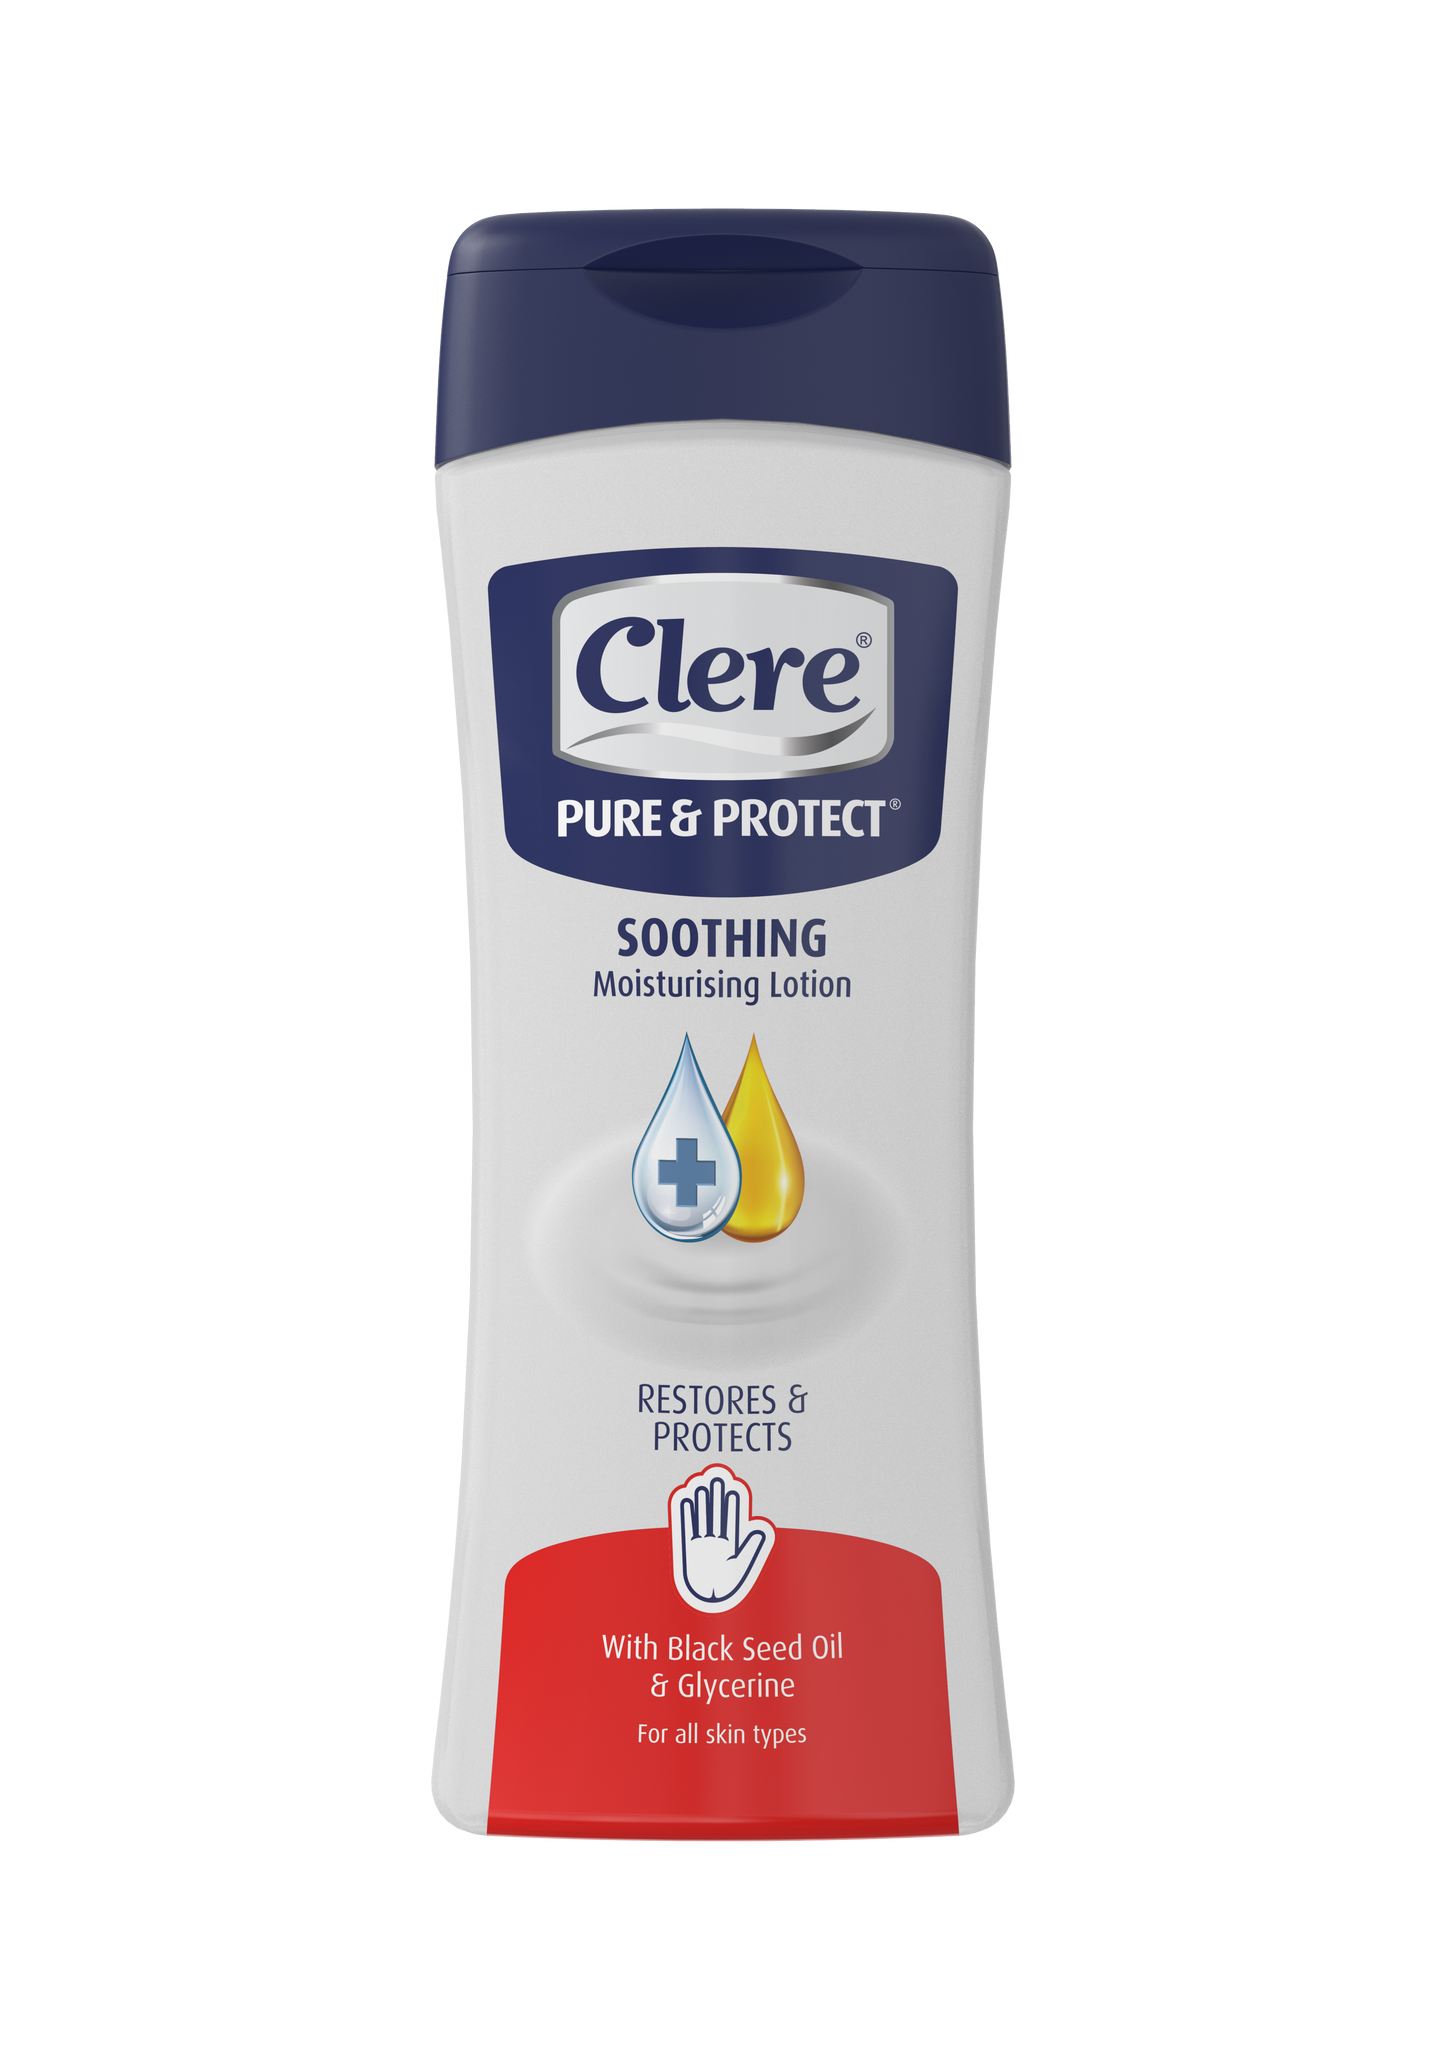 Clere Pure & Protect Soothing Moisturising Lotion (lotion bottle)  - 400ml